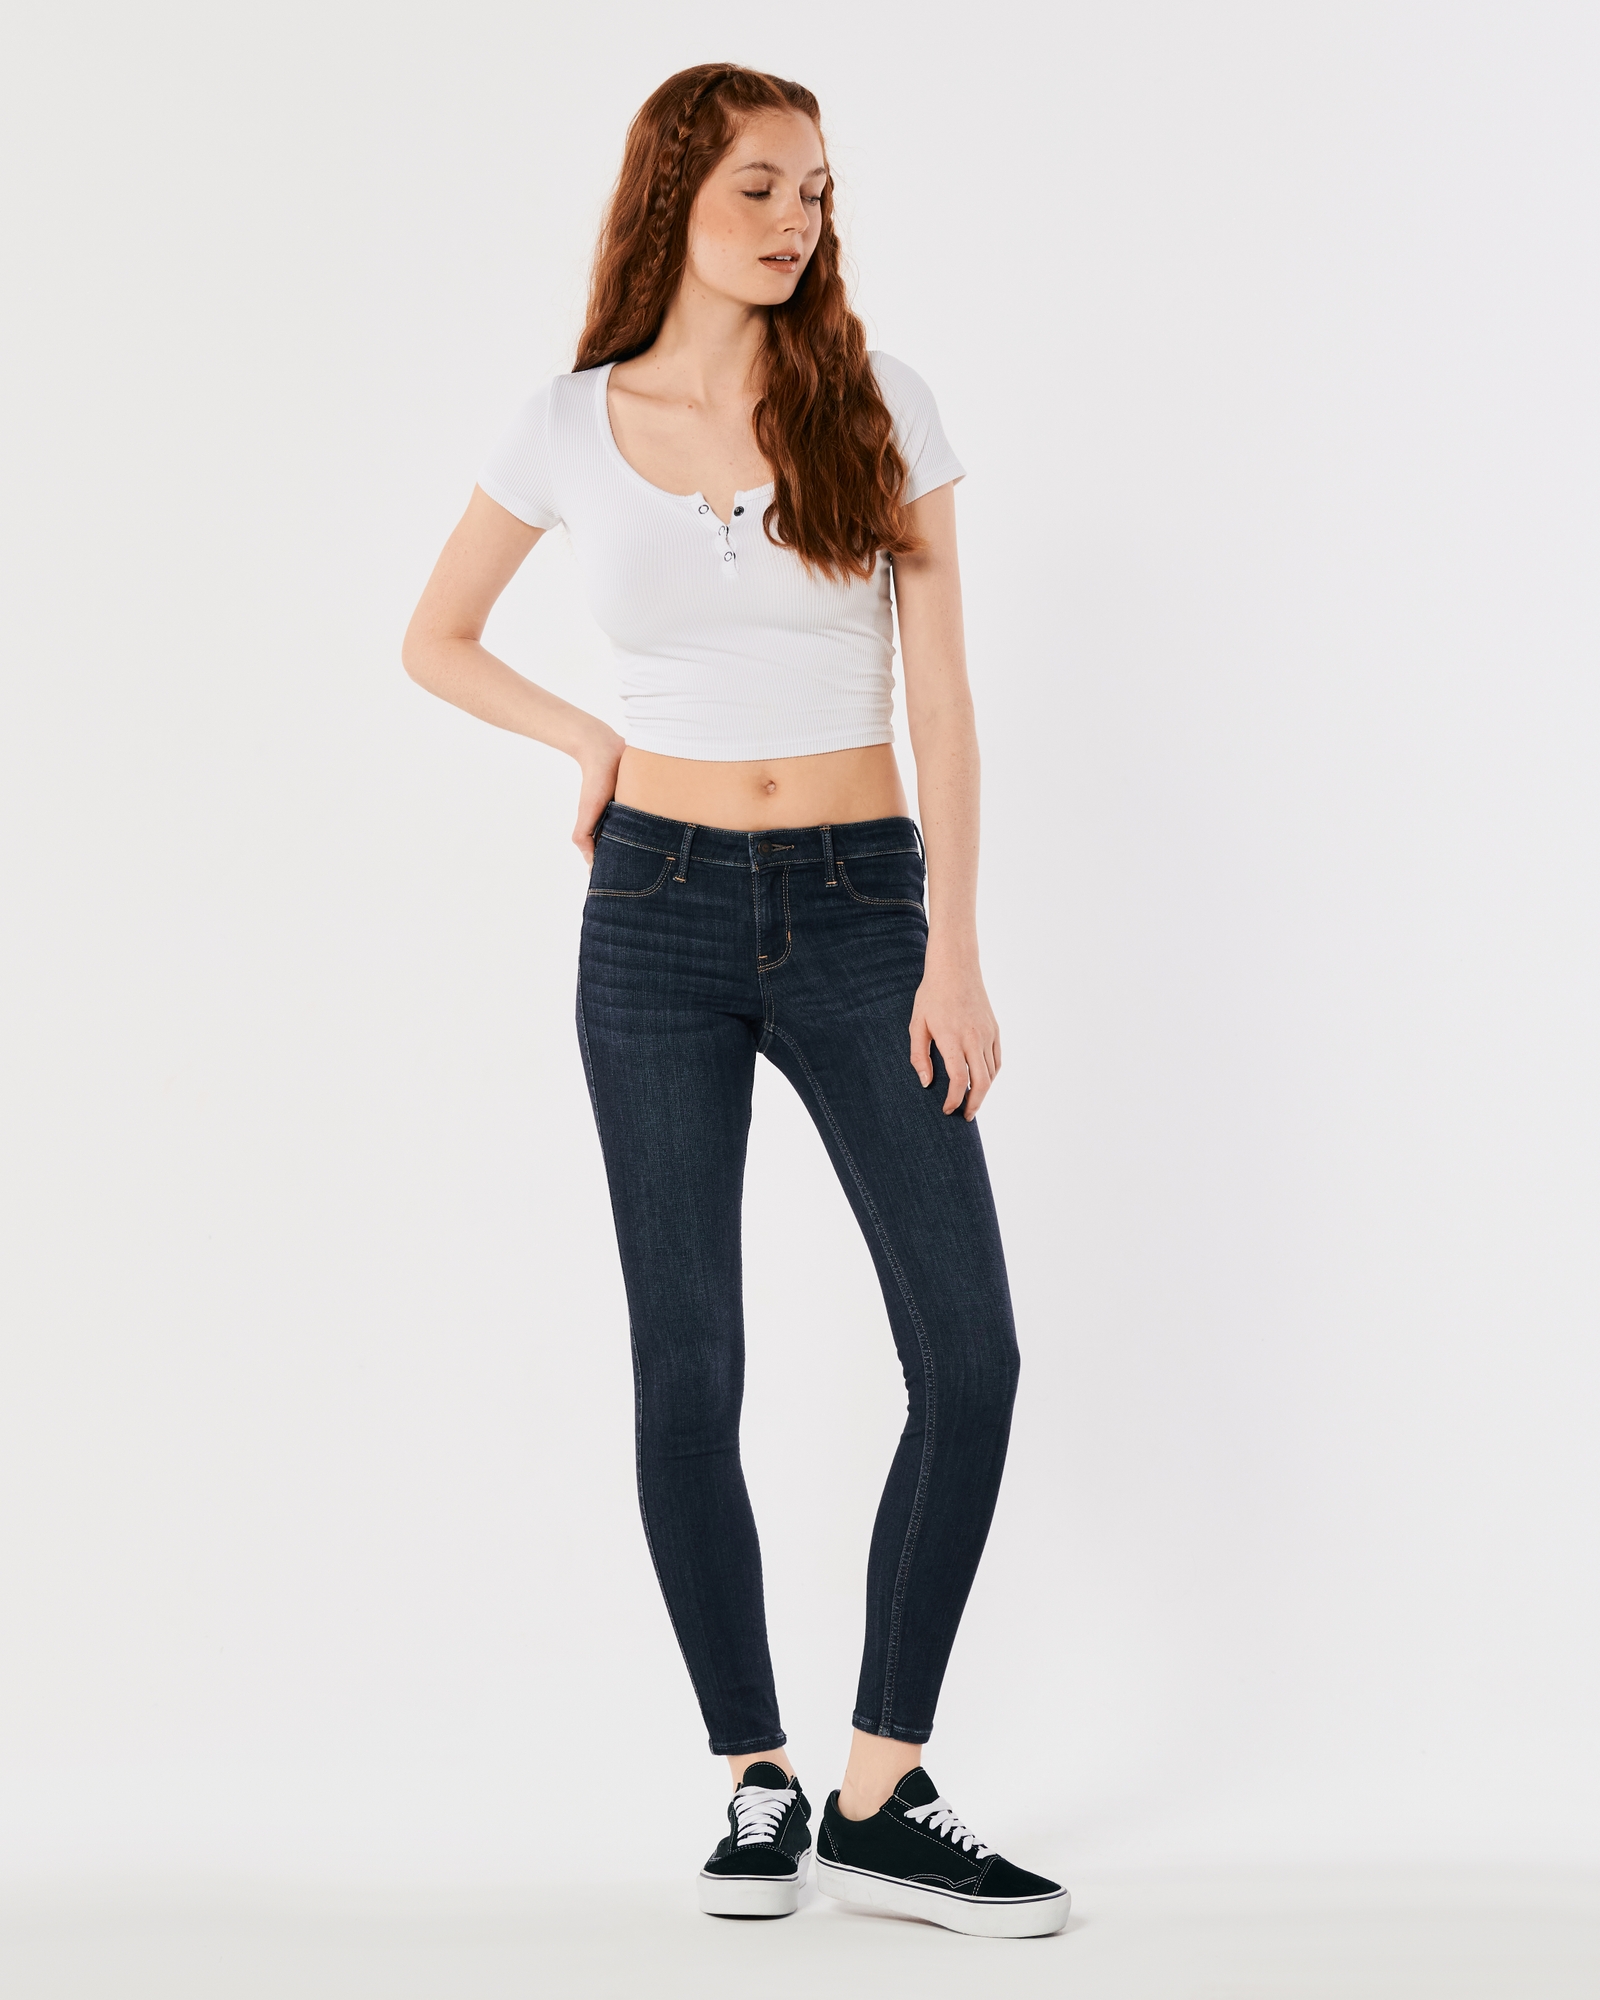 https://img.hollisterco.com/is/image/anf/KIC_355-9216-0521-276_model1.jpg?policy=product-extra-large